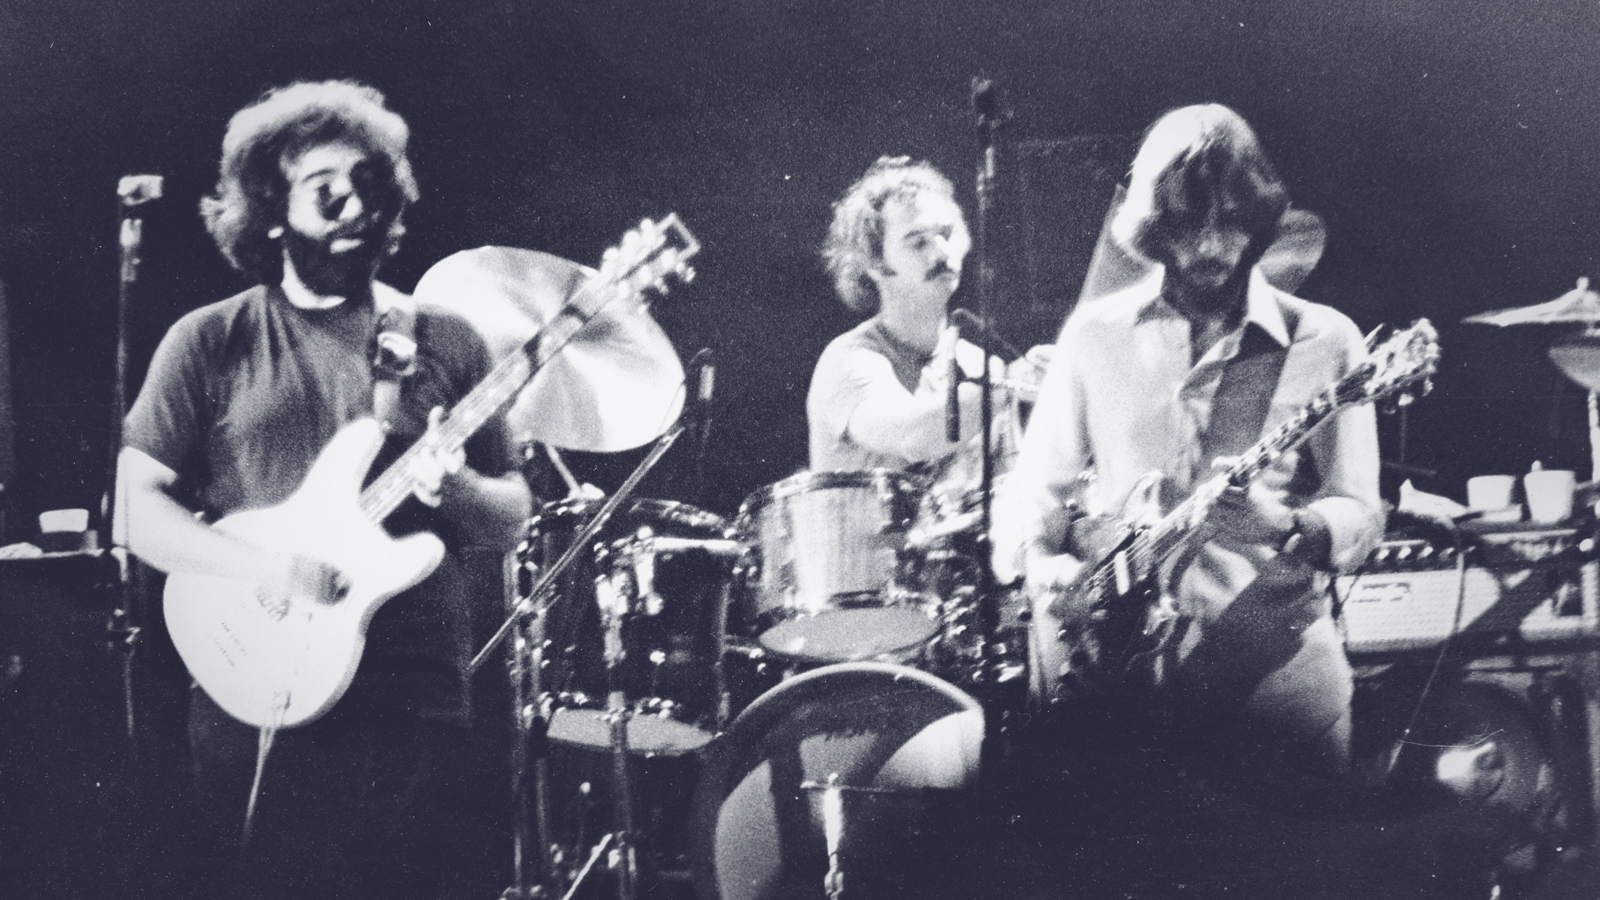 A black-and-white photograph of the Grateful Dead performing at Cornell University in 1977.